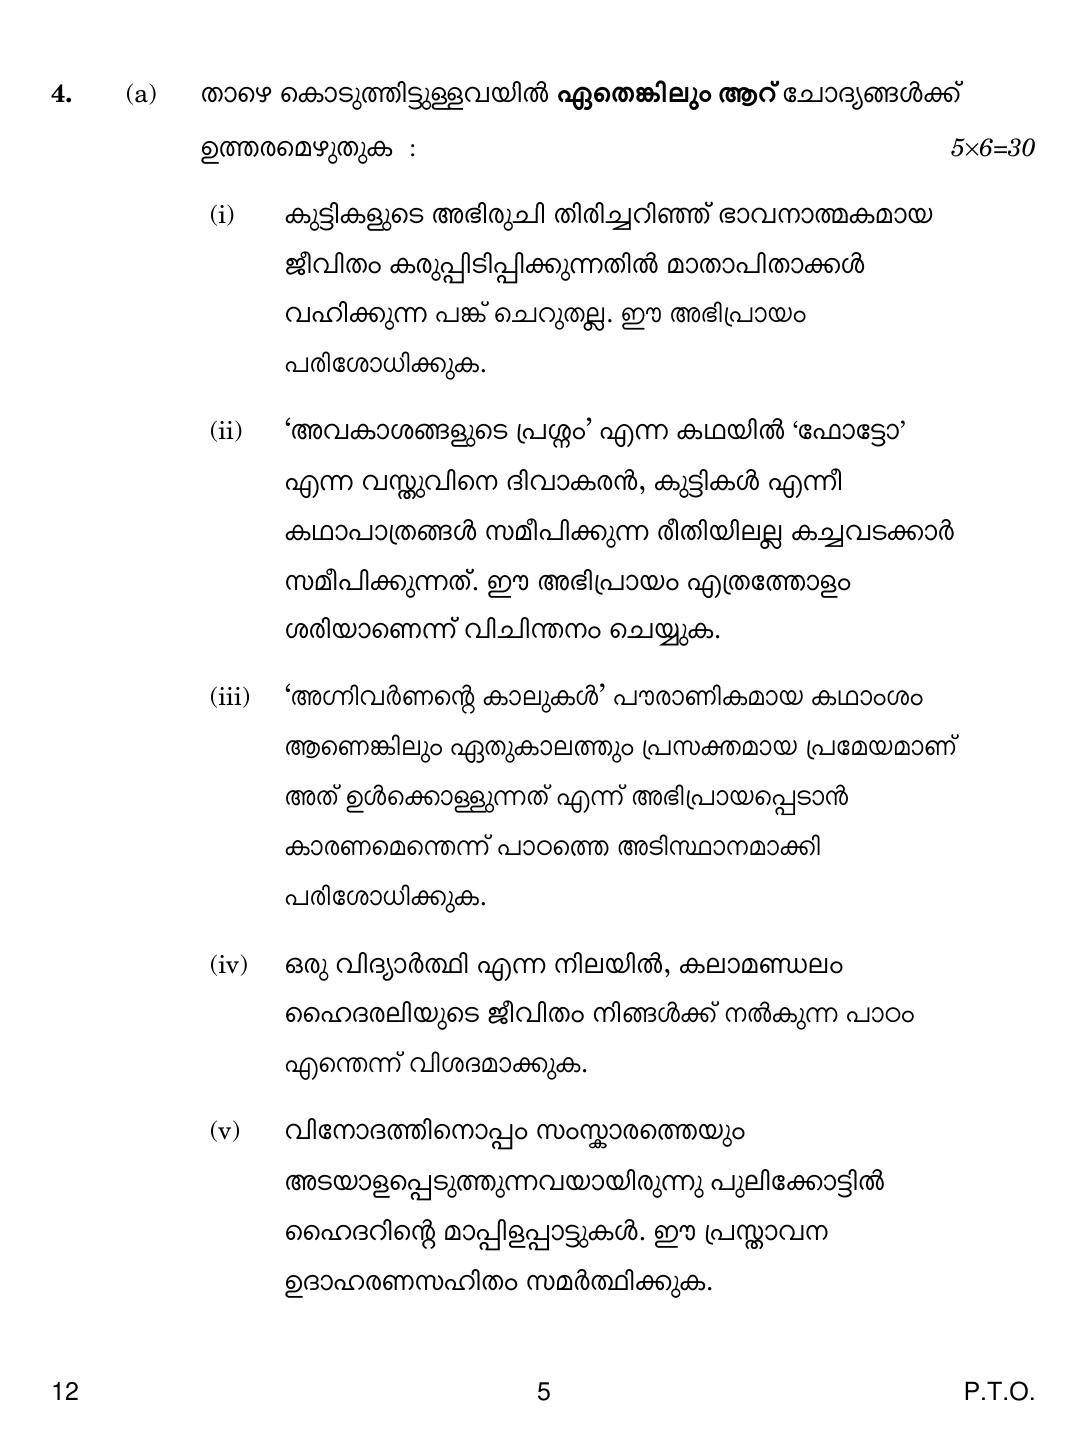 CBSE Class 12 12 Malayalam 2019 Compartment Question Paper - Page 5